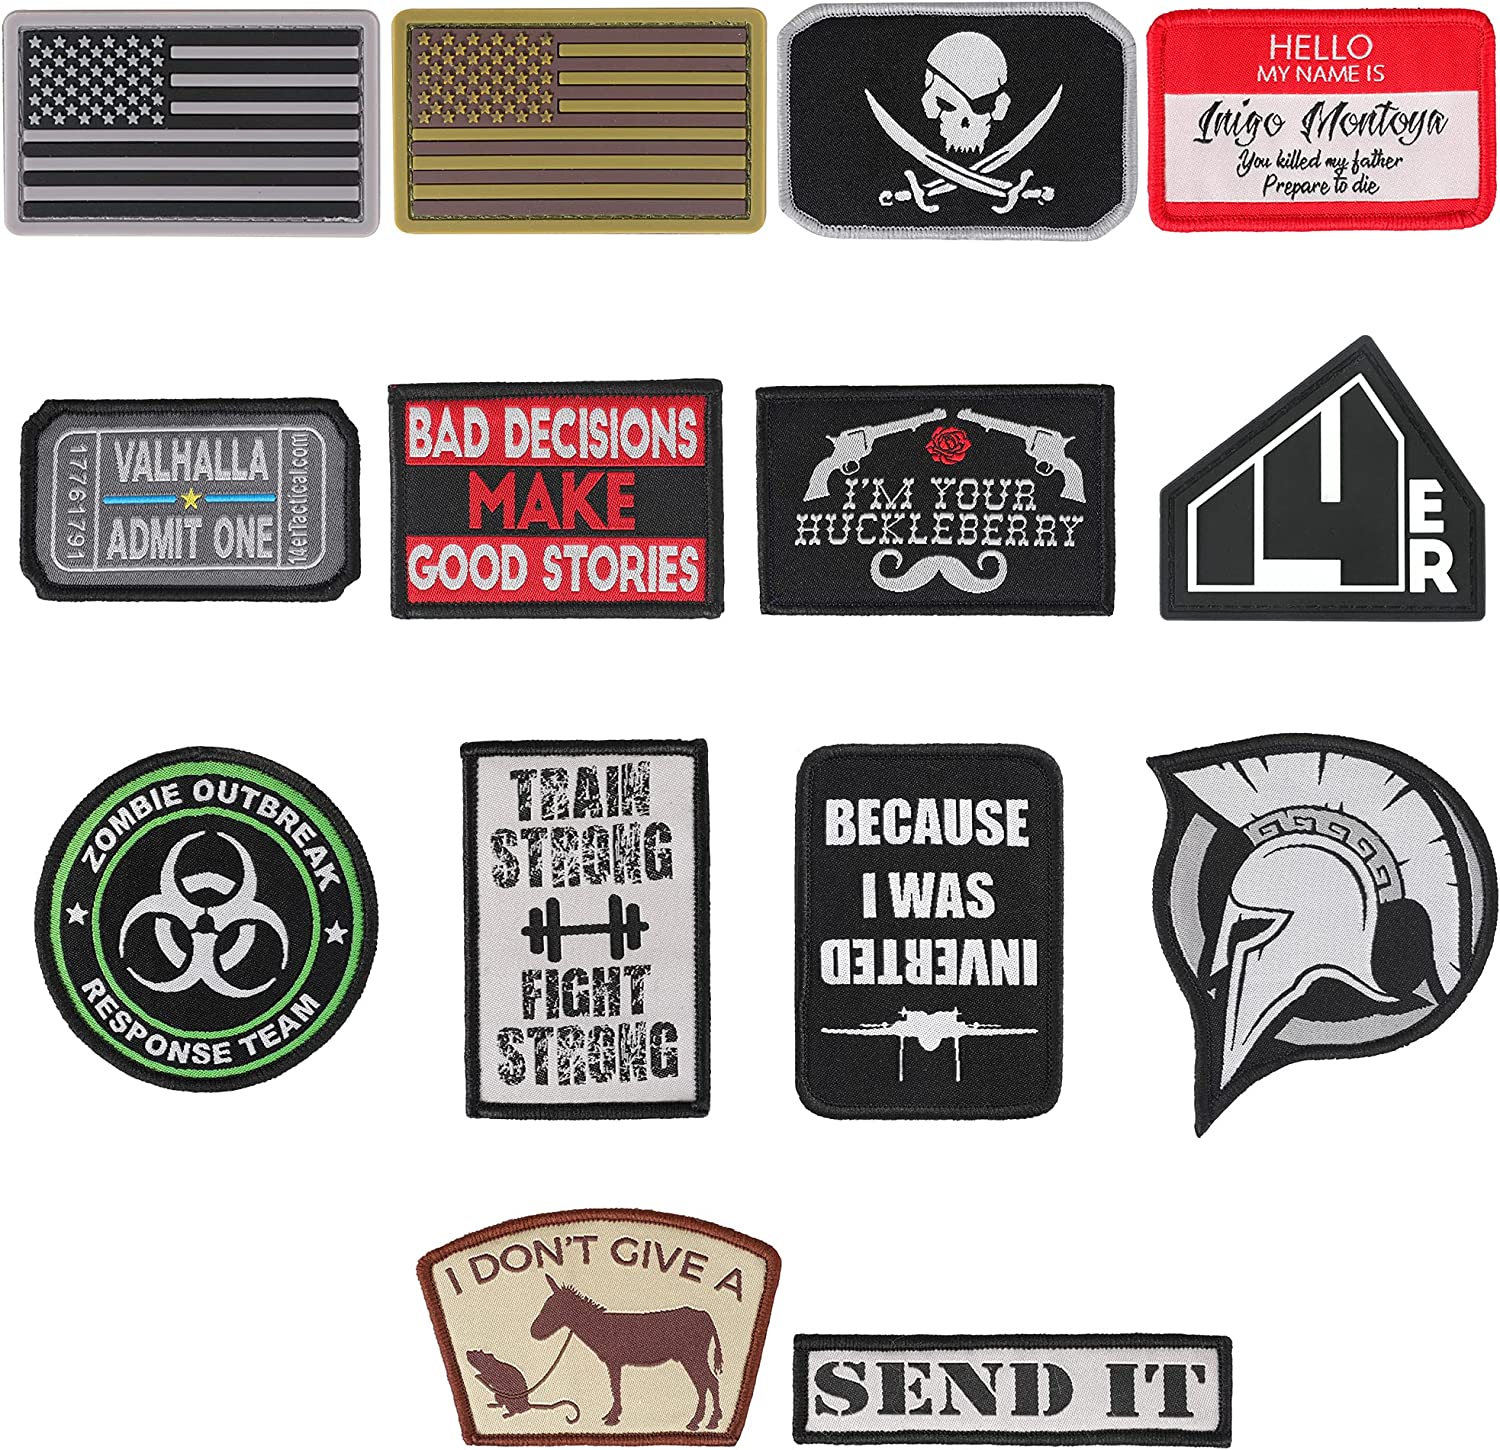 14er Tactical Morale Patches (14-Pack) | Hook & Loop Backed, 3” x 2” PVC Flags & Funny Patches | Perfect for Hat, Backpack, Jacket, Military, Police, Airsoft Gear | Display Your USA Flag!